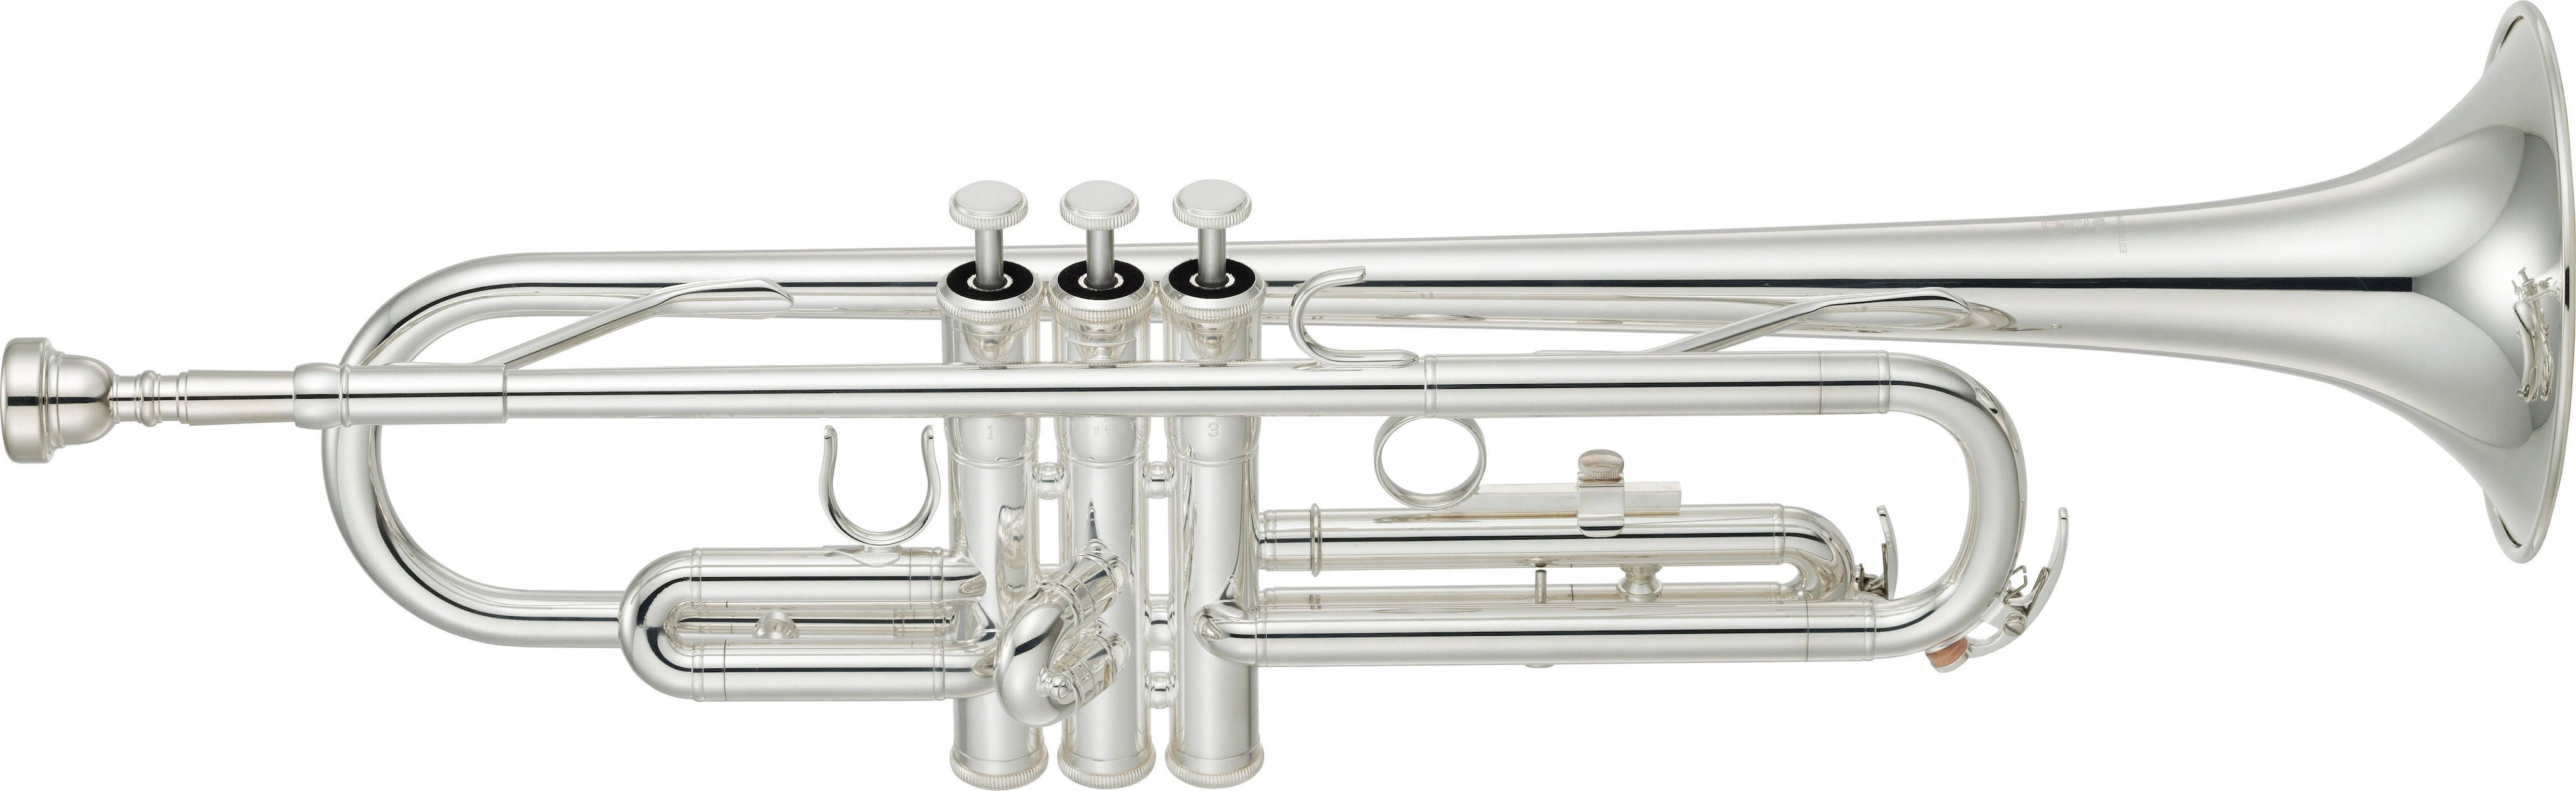 YTR-2330 - Overview - Bb Trumpets - Trumpets - Brass 